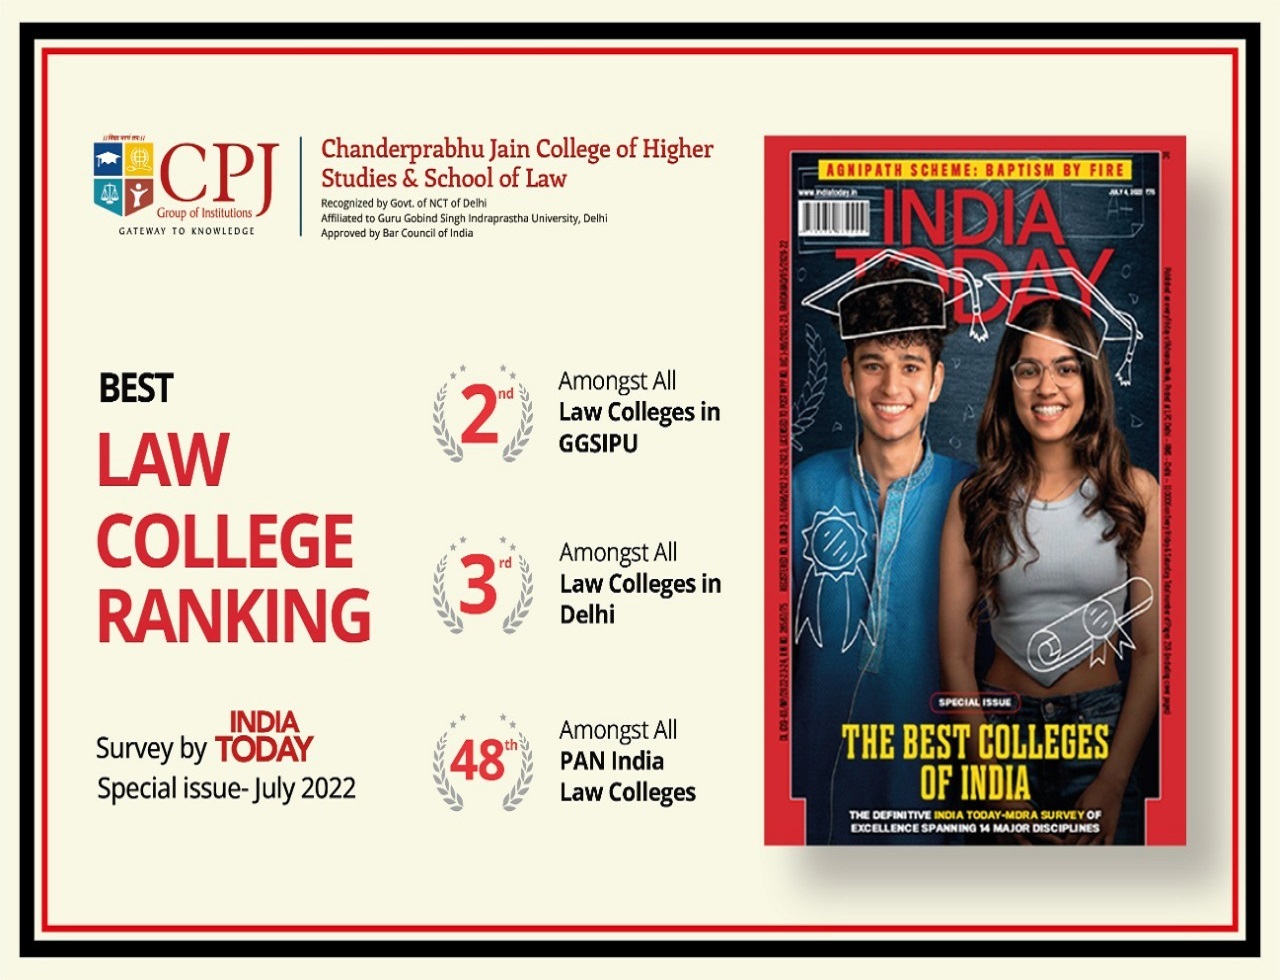 India Today Survey in the Category of Best LAW Colleges